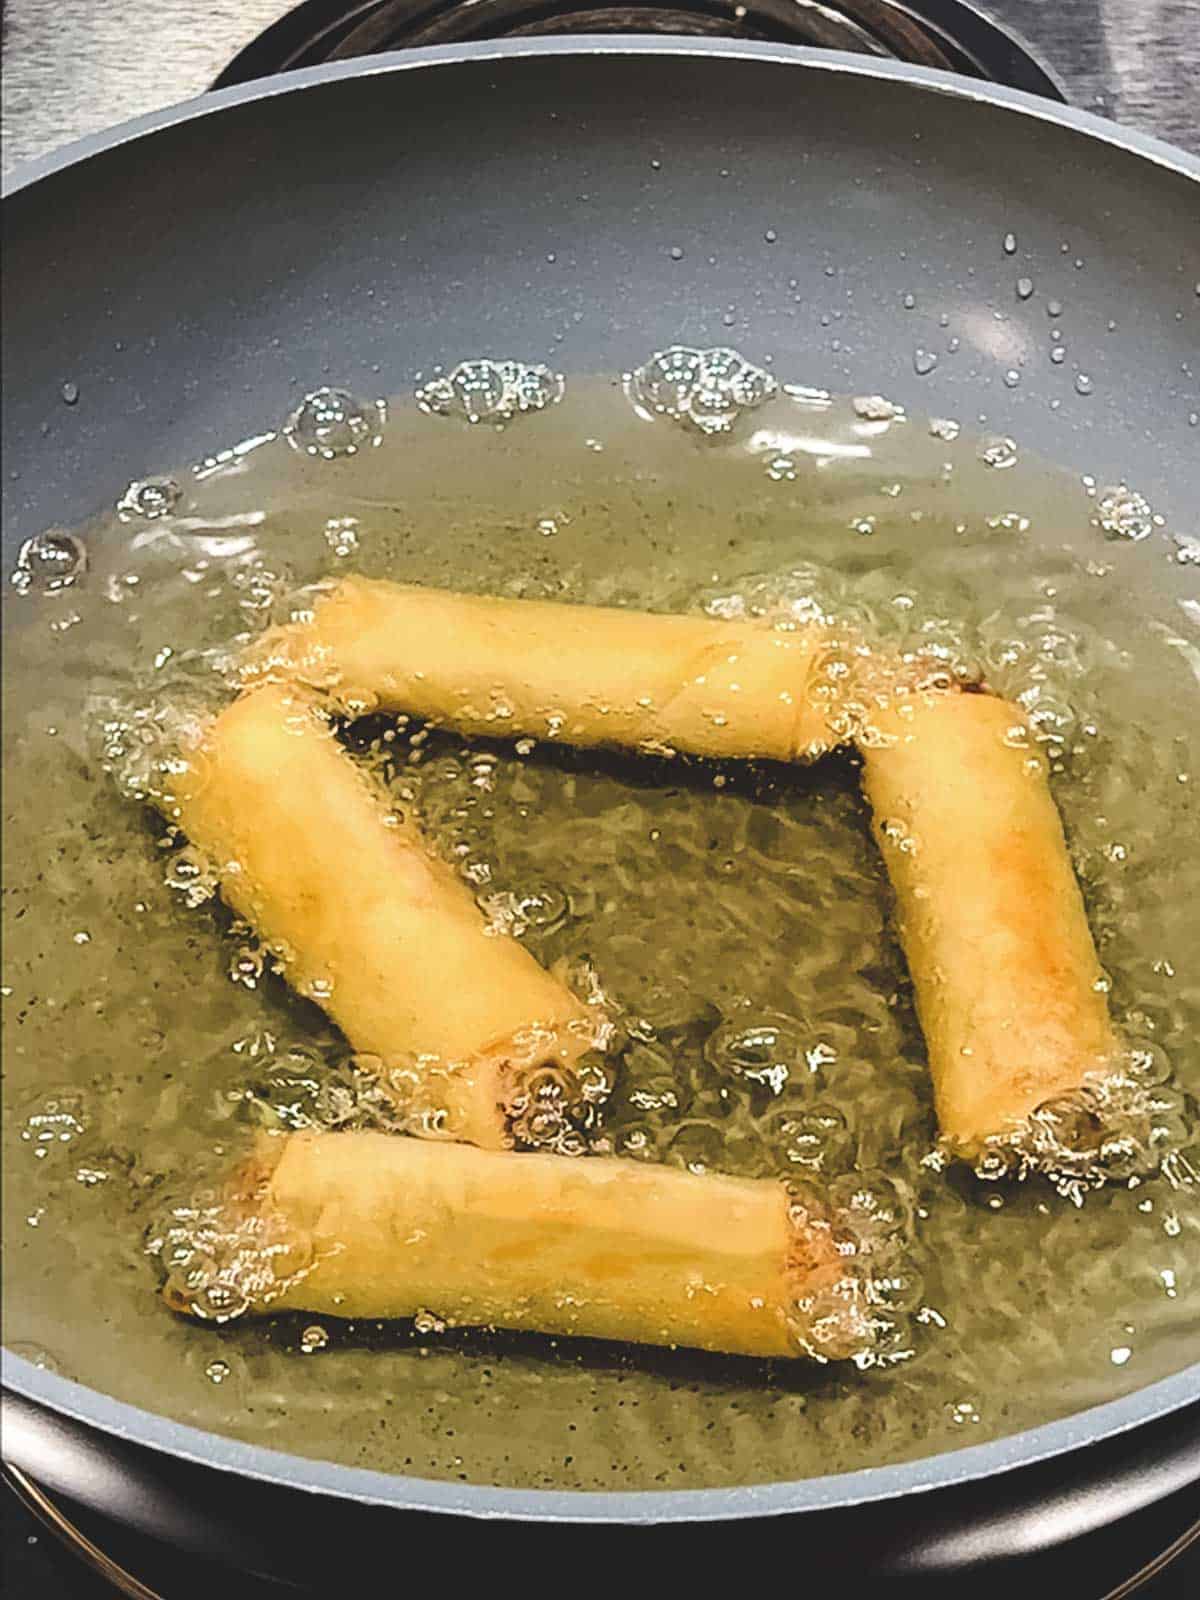 Frying the spring rolls in Wok